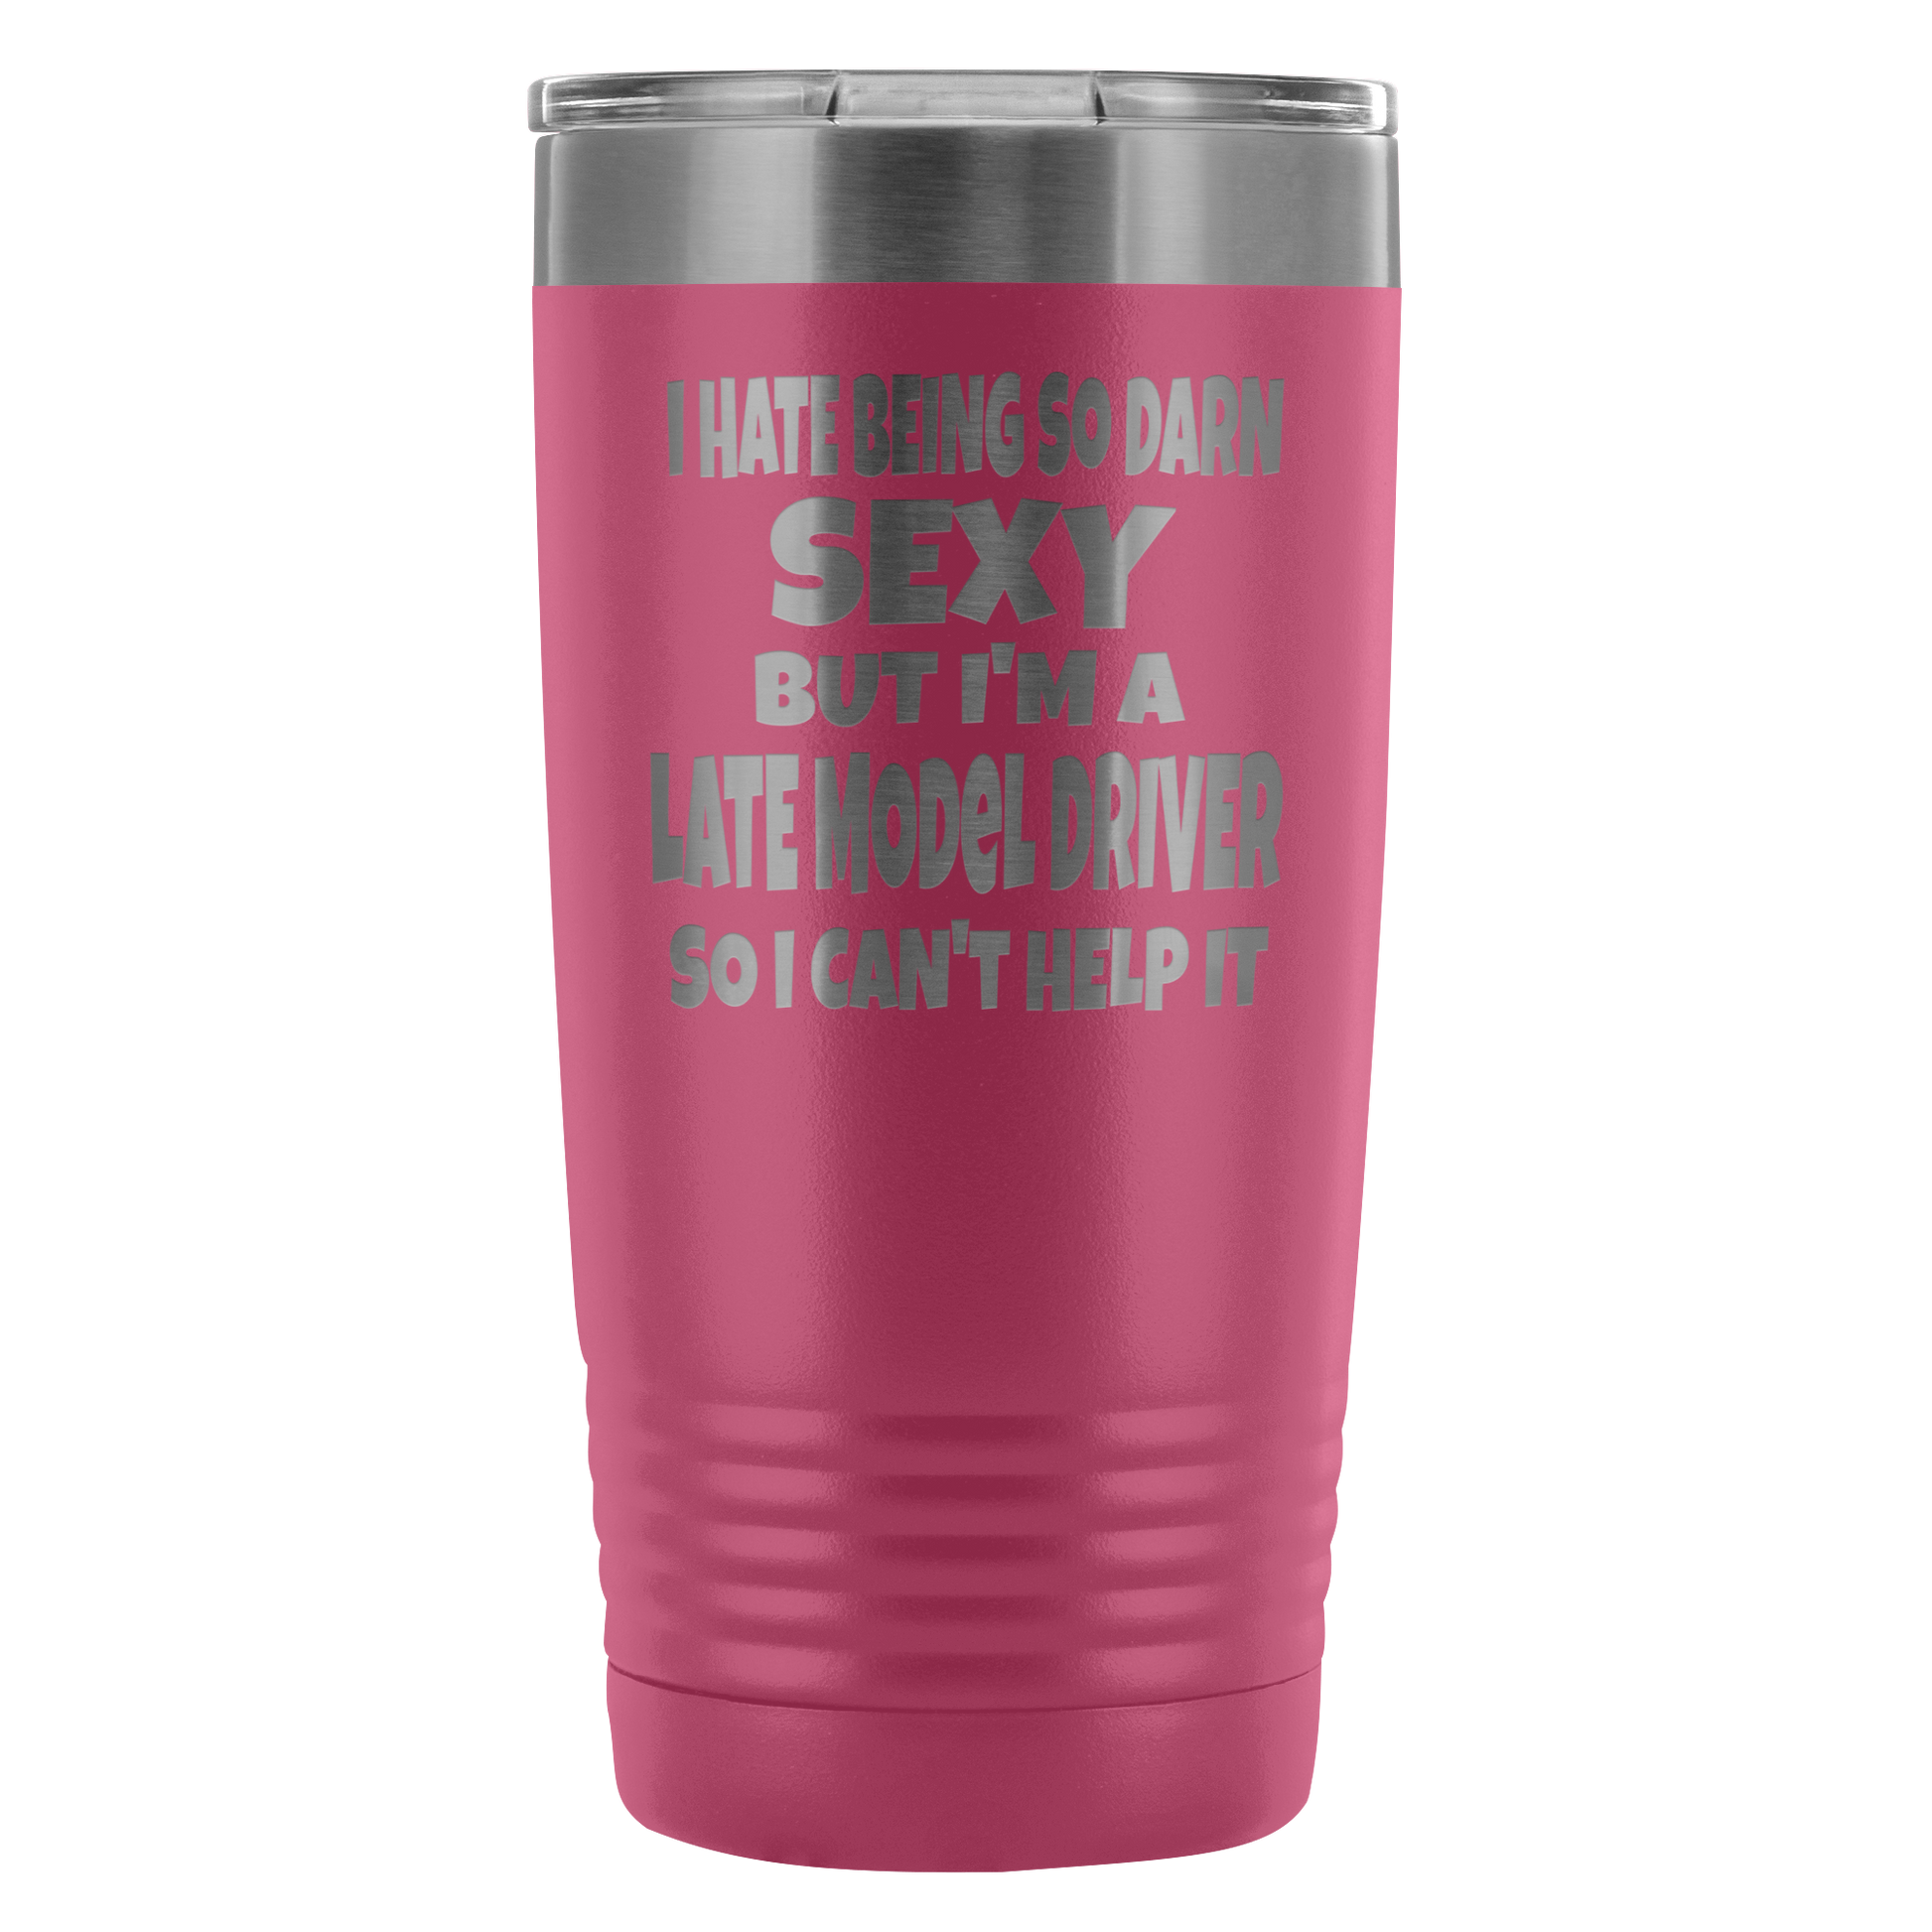 Hate Being So Darn Sexy Late Model Racer 20 Oz Travel Tumbler - Turn Left T-Shirts Racewear